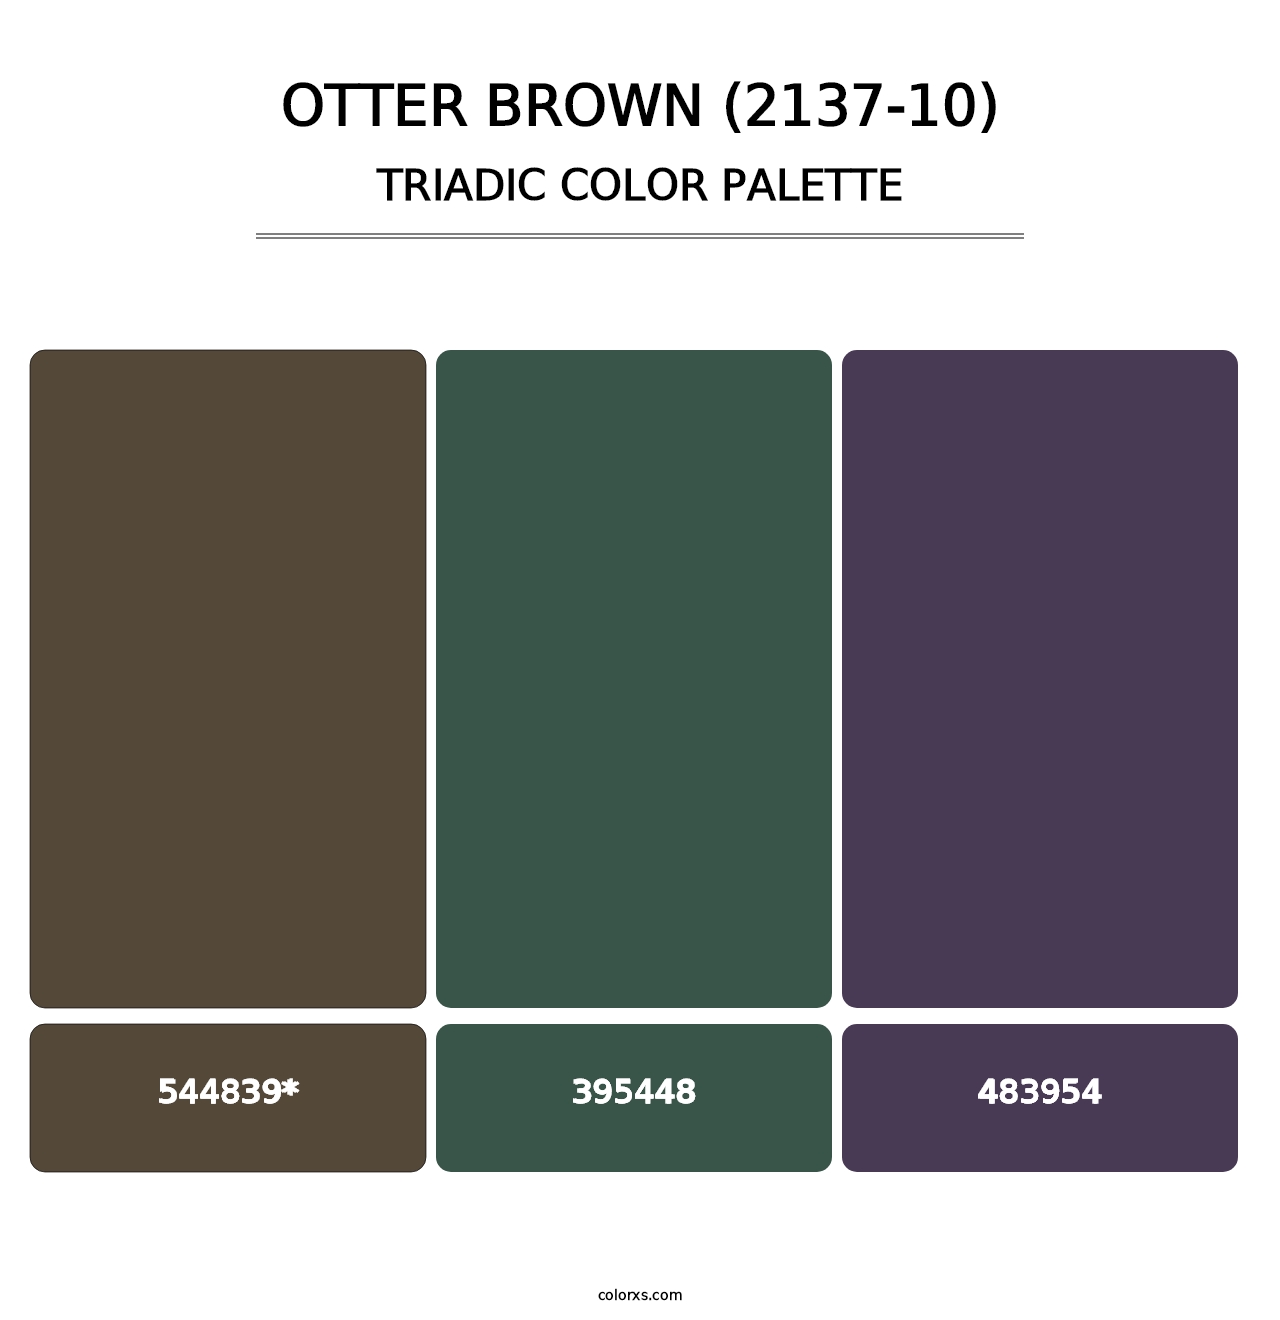 Otter Brown (2137-10) - Triadic Color Palette